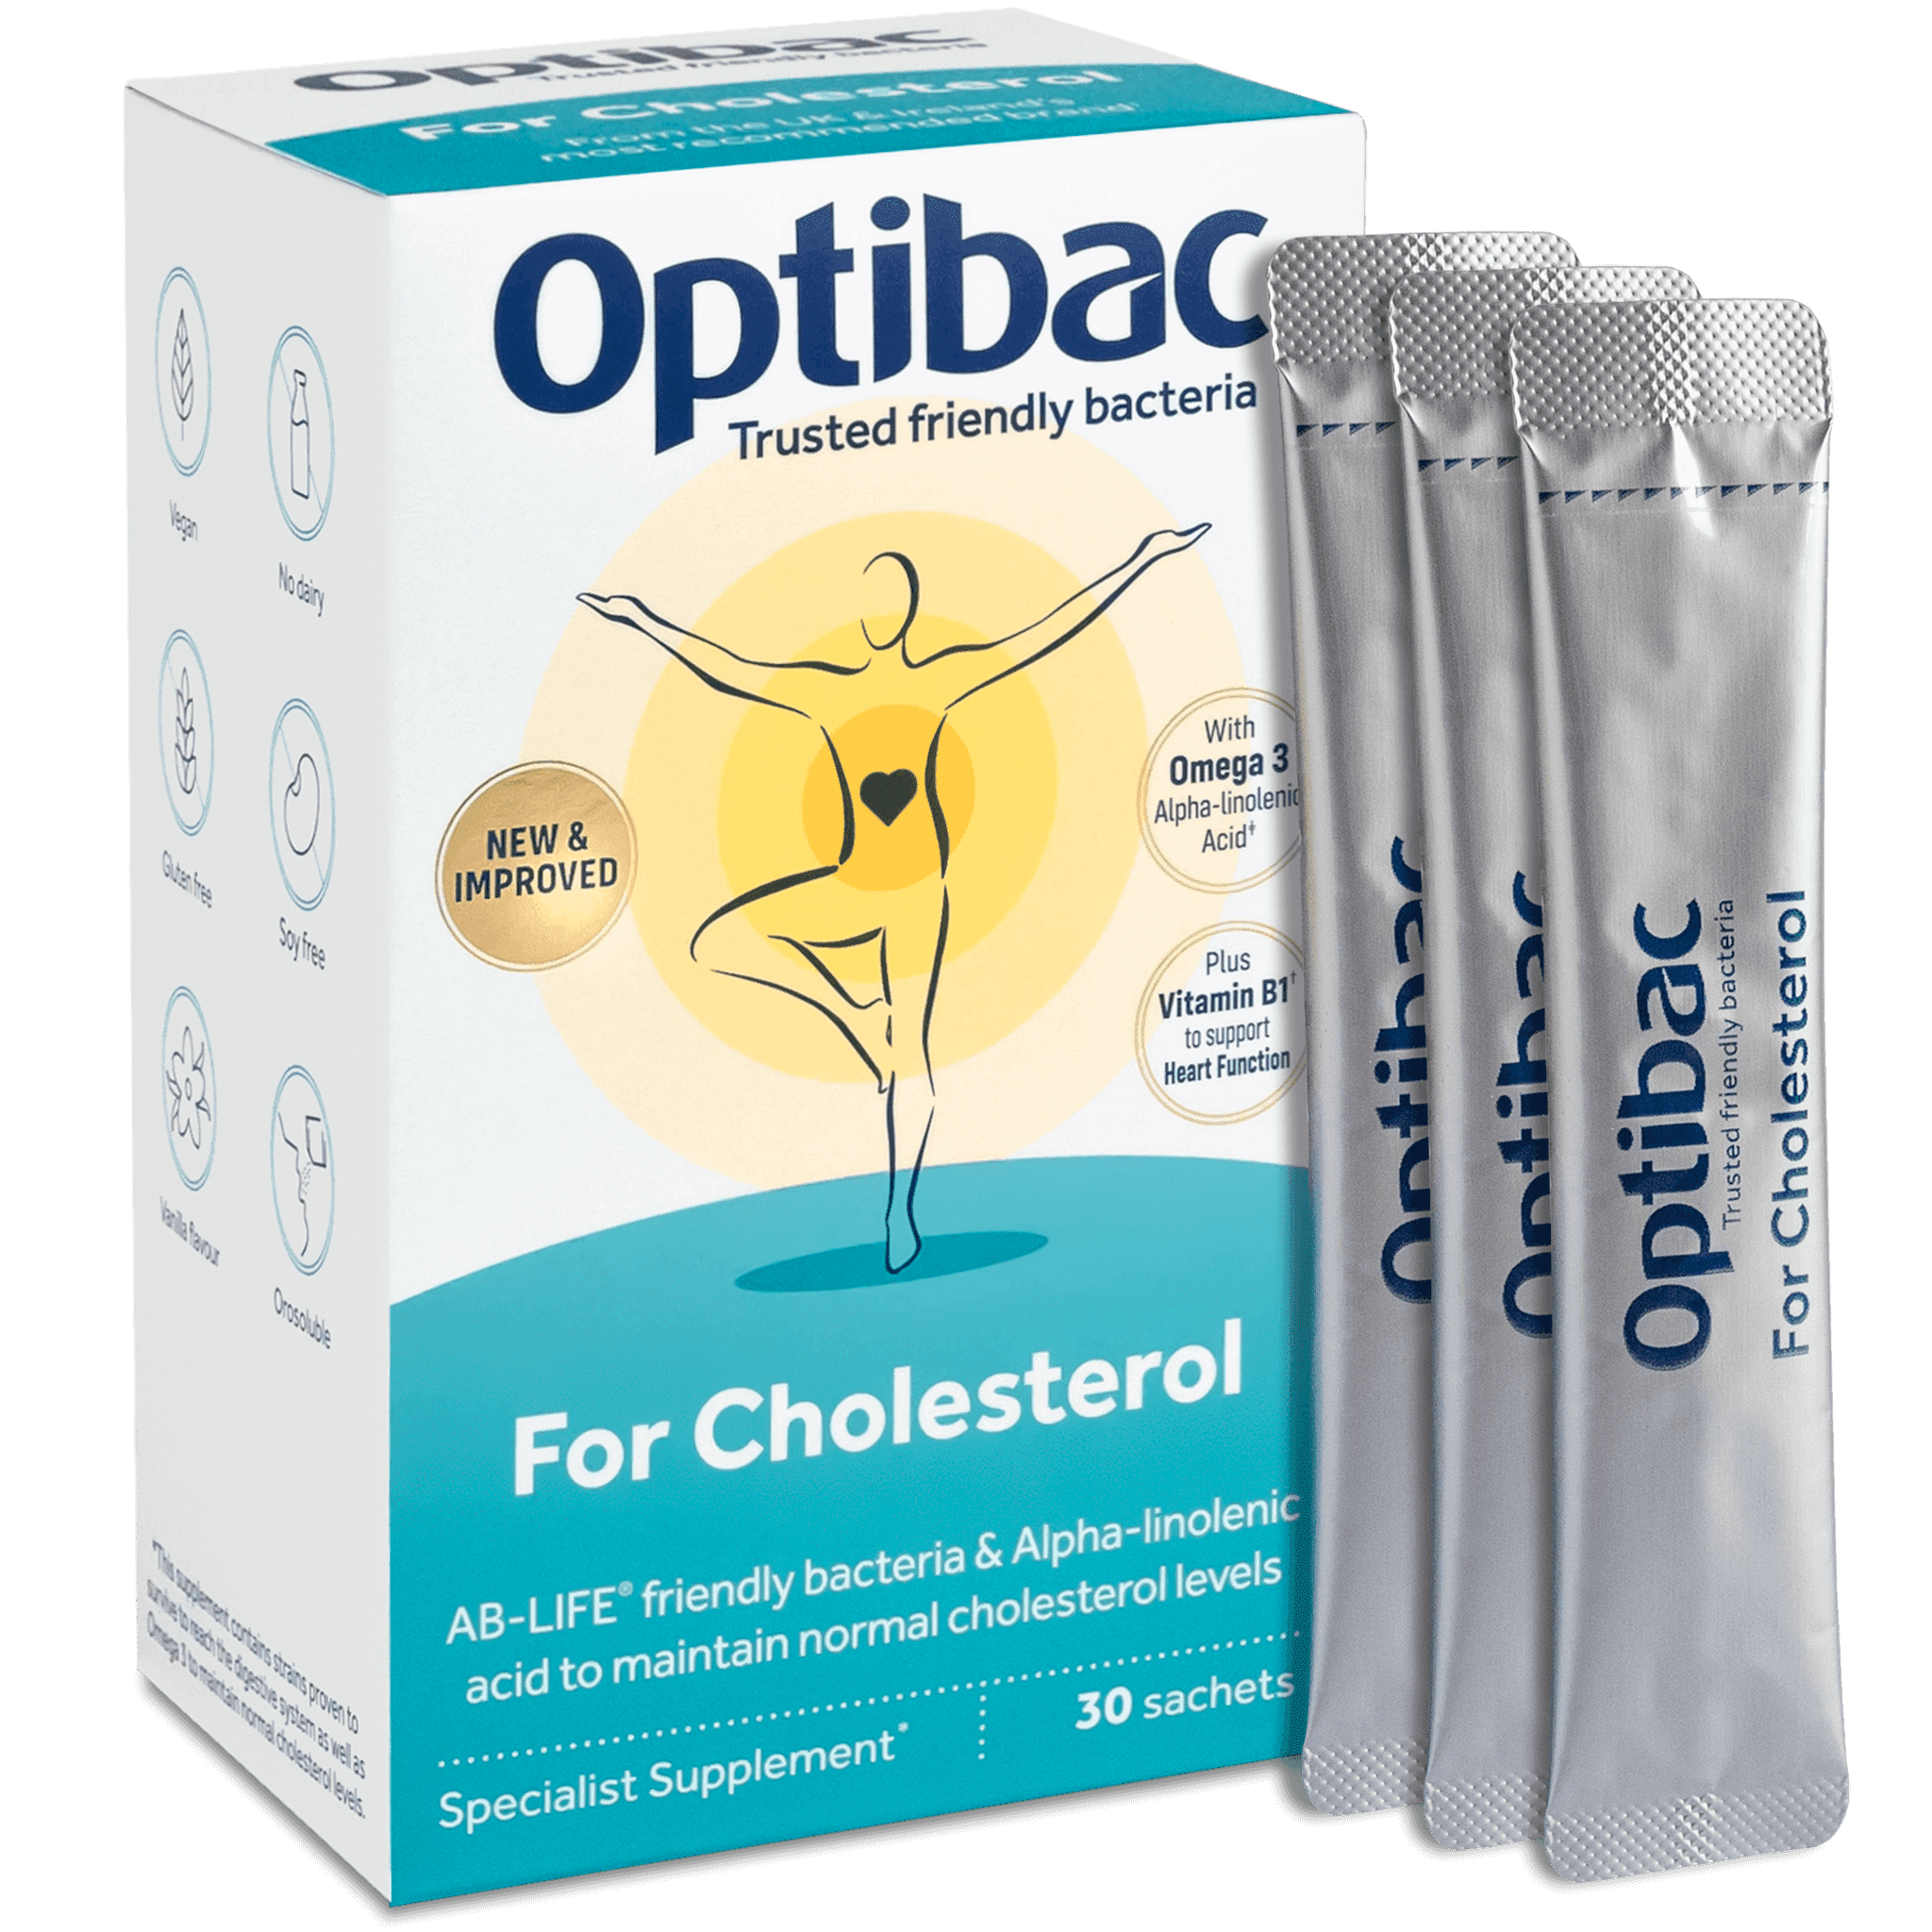 Optibac Probiotics For Cholesterol | supplements to maintain normal cholesterol levels | with Omega 3 and Vitamin B1